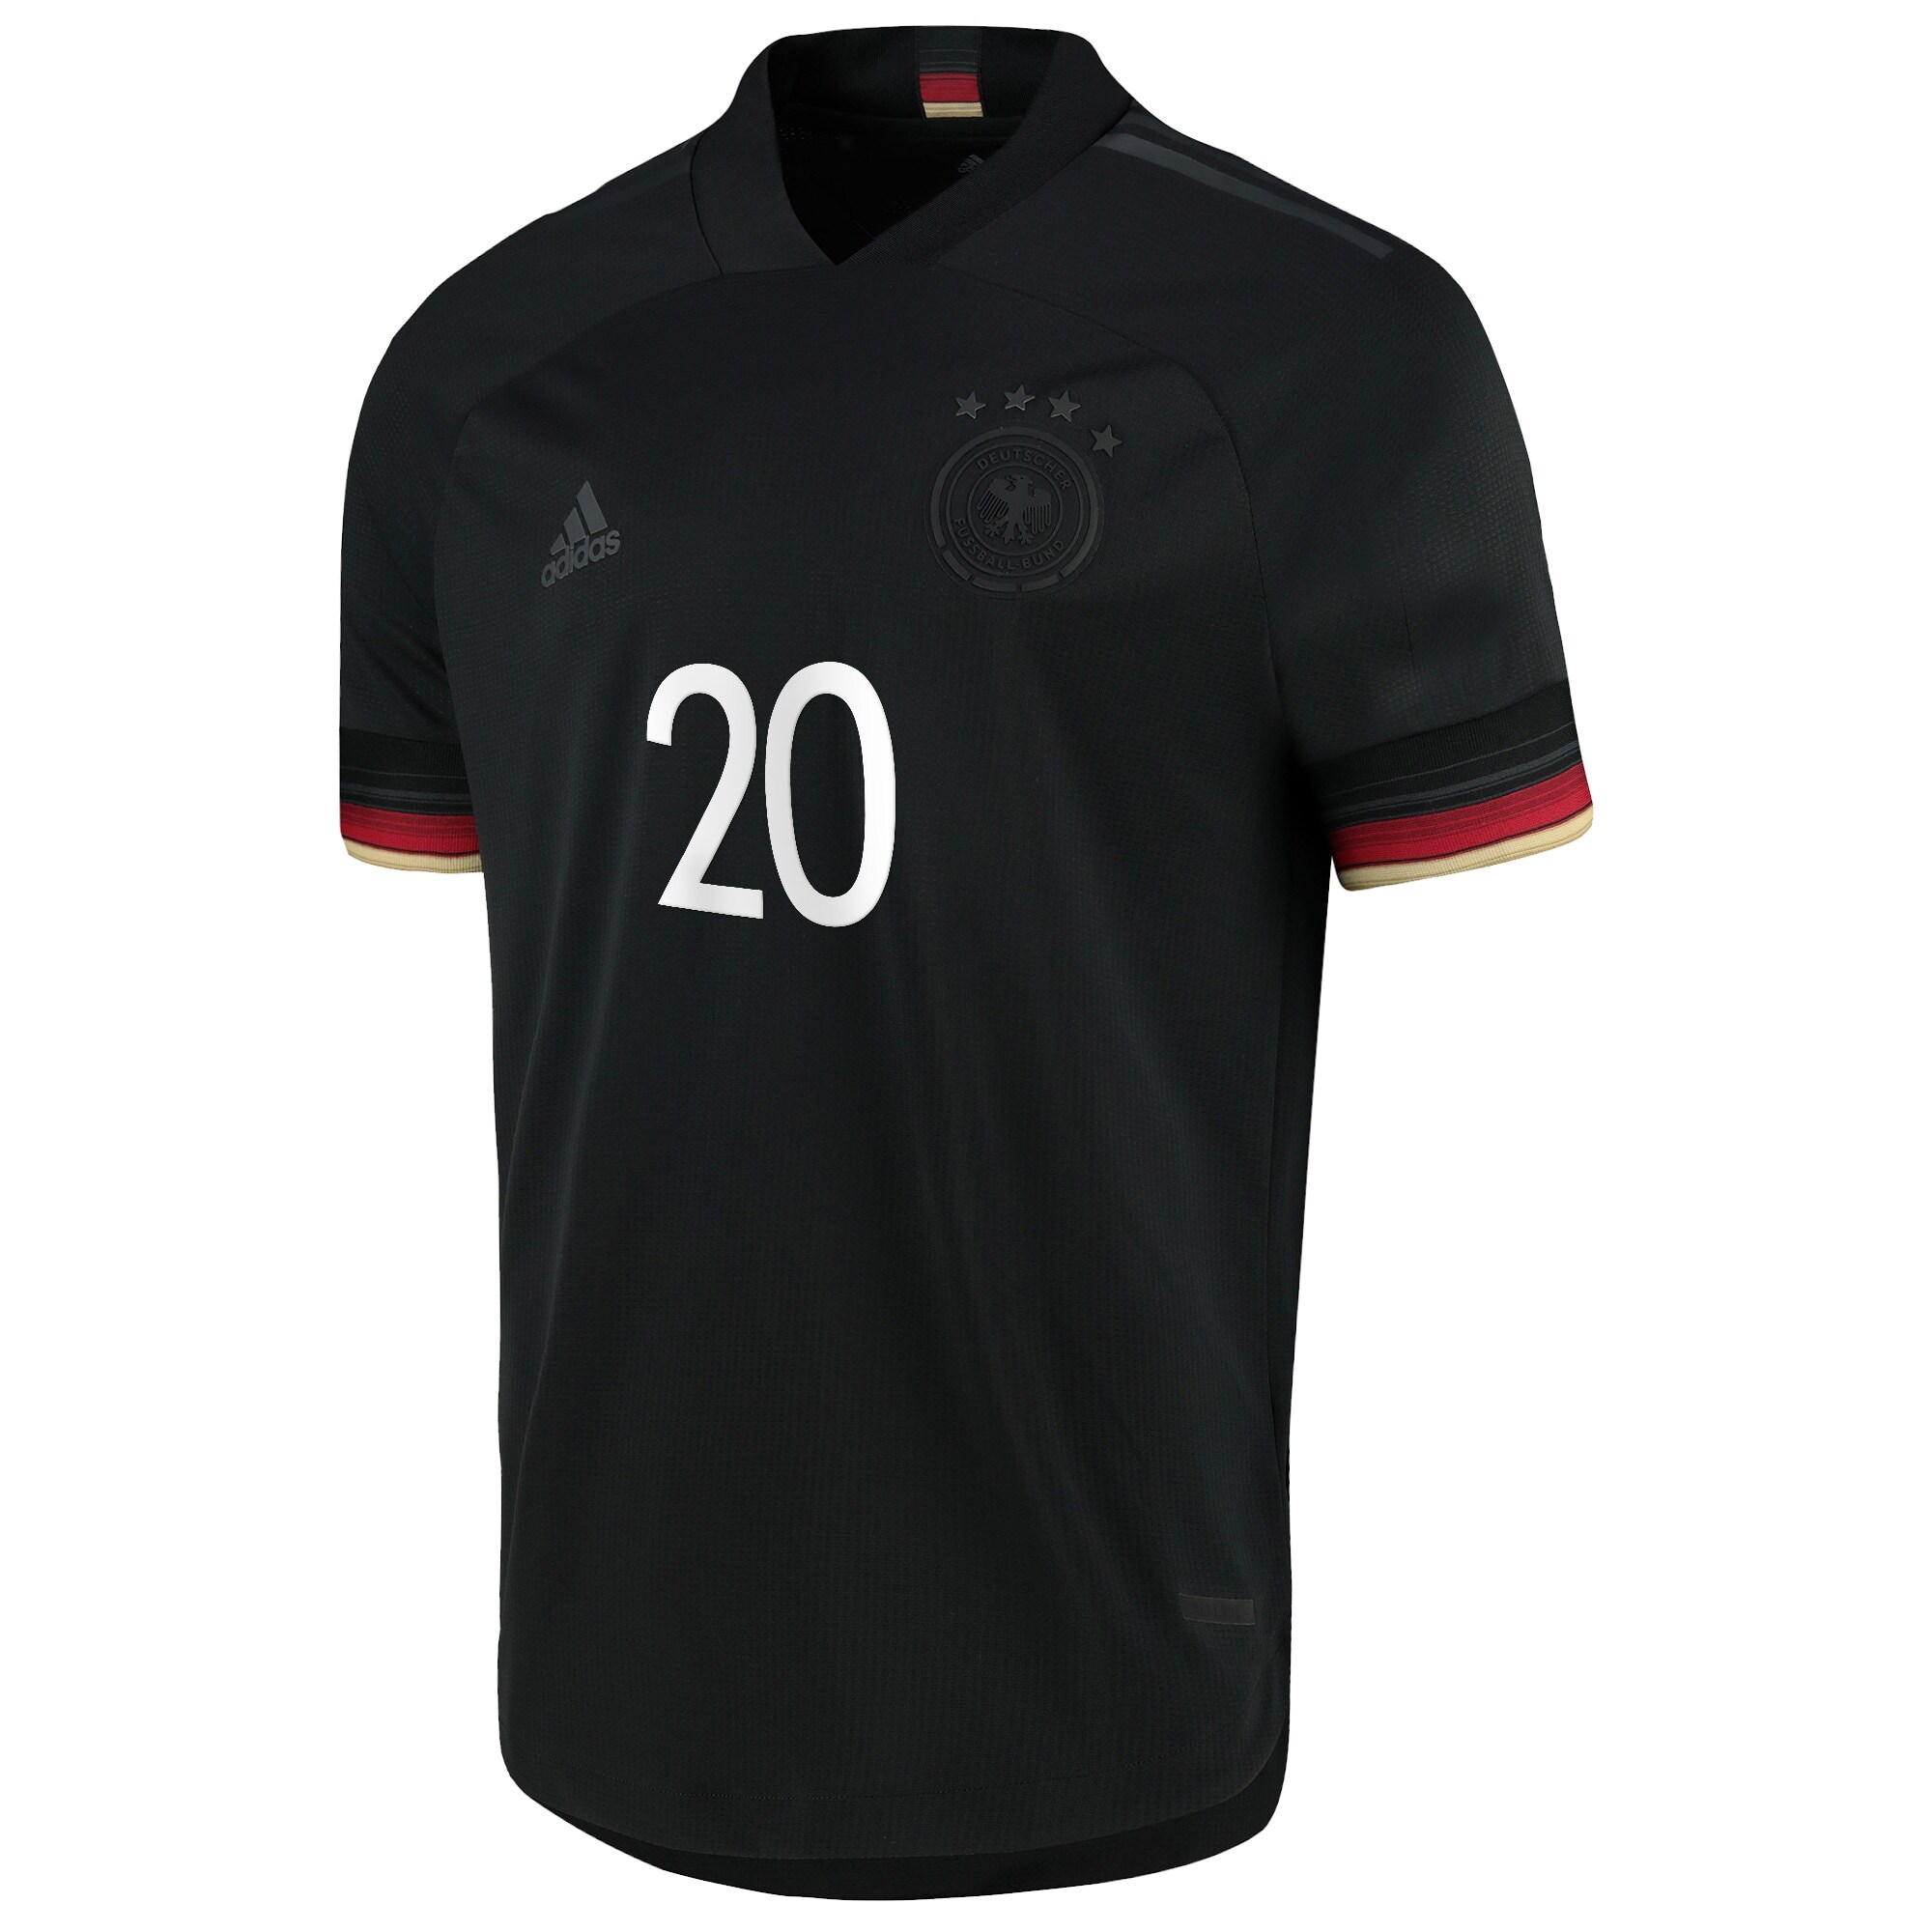 Germany Authentic Away Shirt 2021-22 with Gosens 20 printing